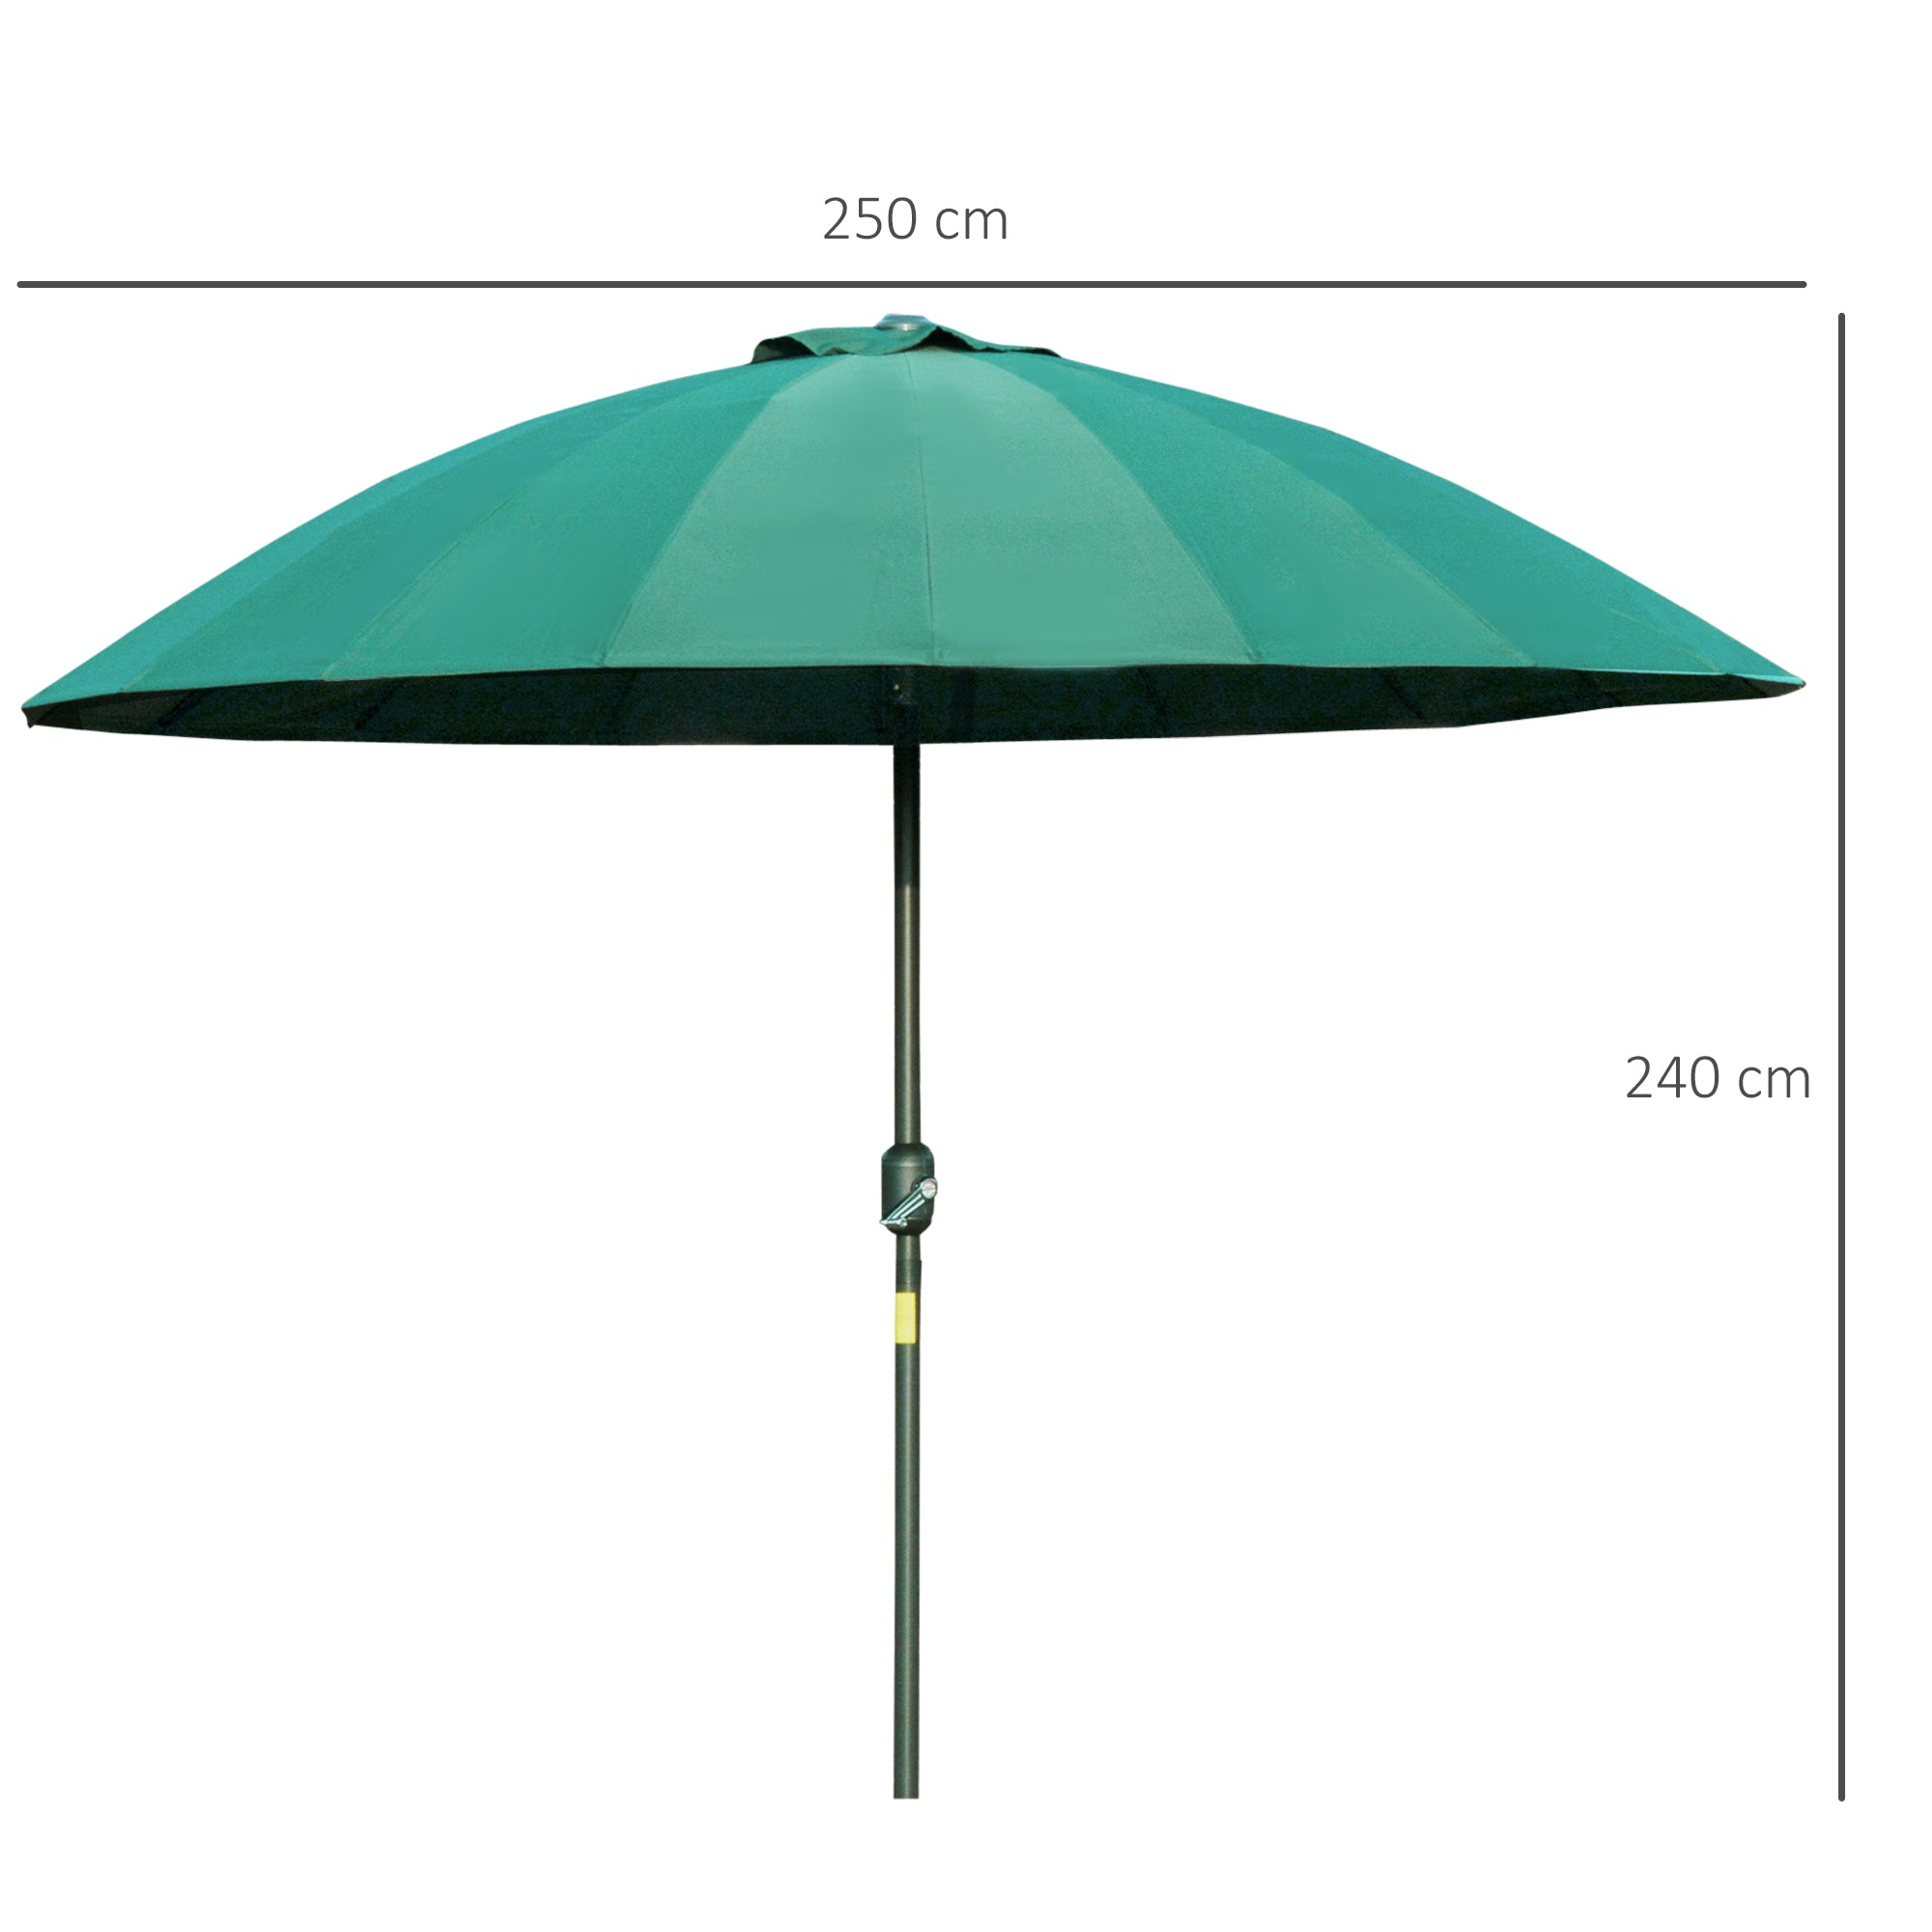 Ф255cm Patio Parasol Umbrella Outdoor Market Table Parasol with Push Button Tilt Crank and Sturdy Ribs for Garden Lawn Backyard Pool Green-2